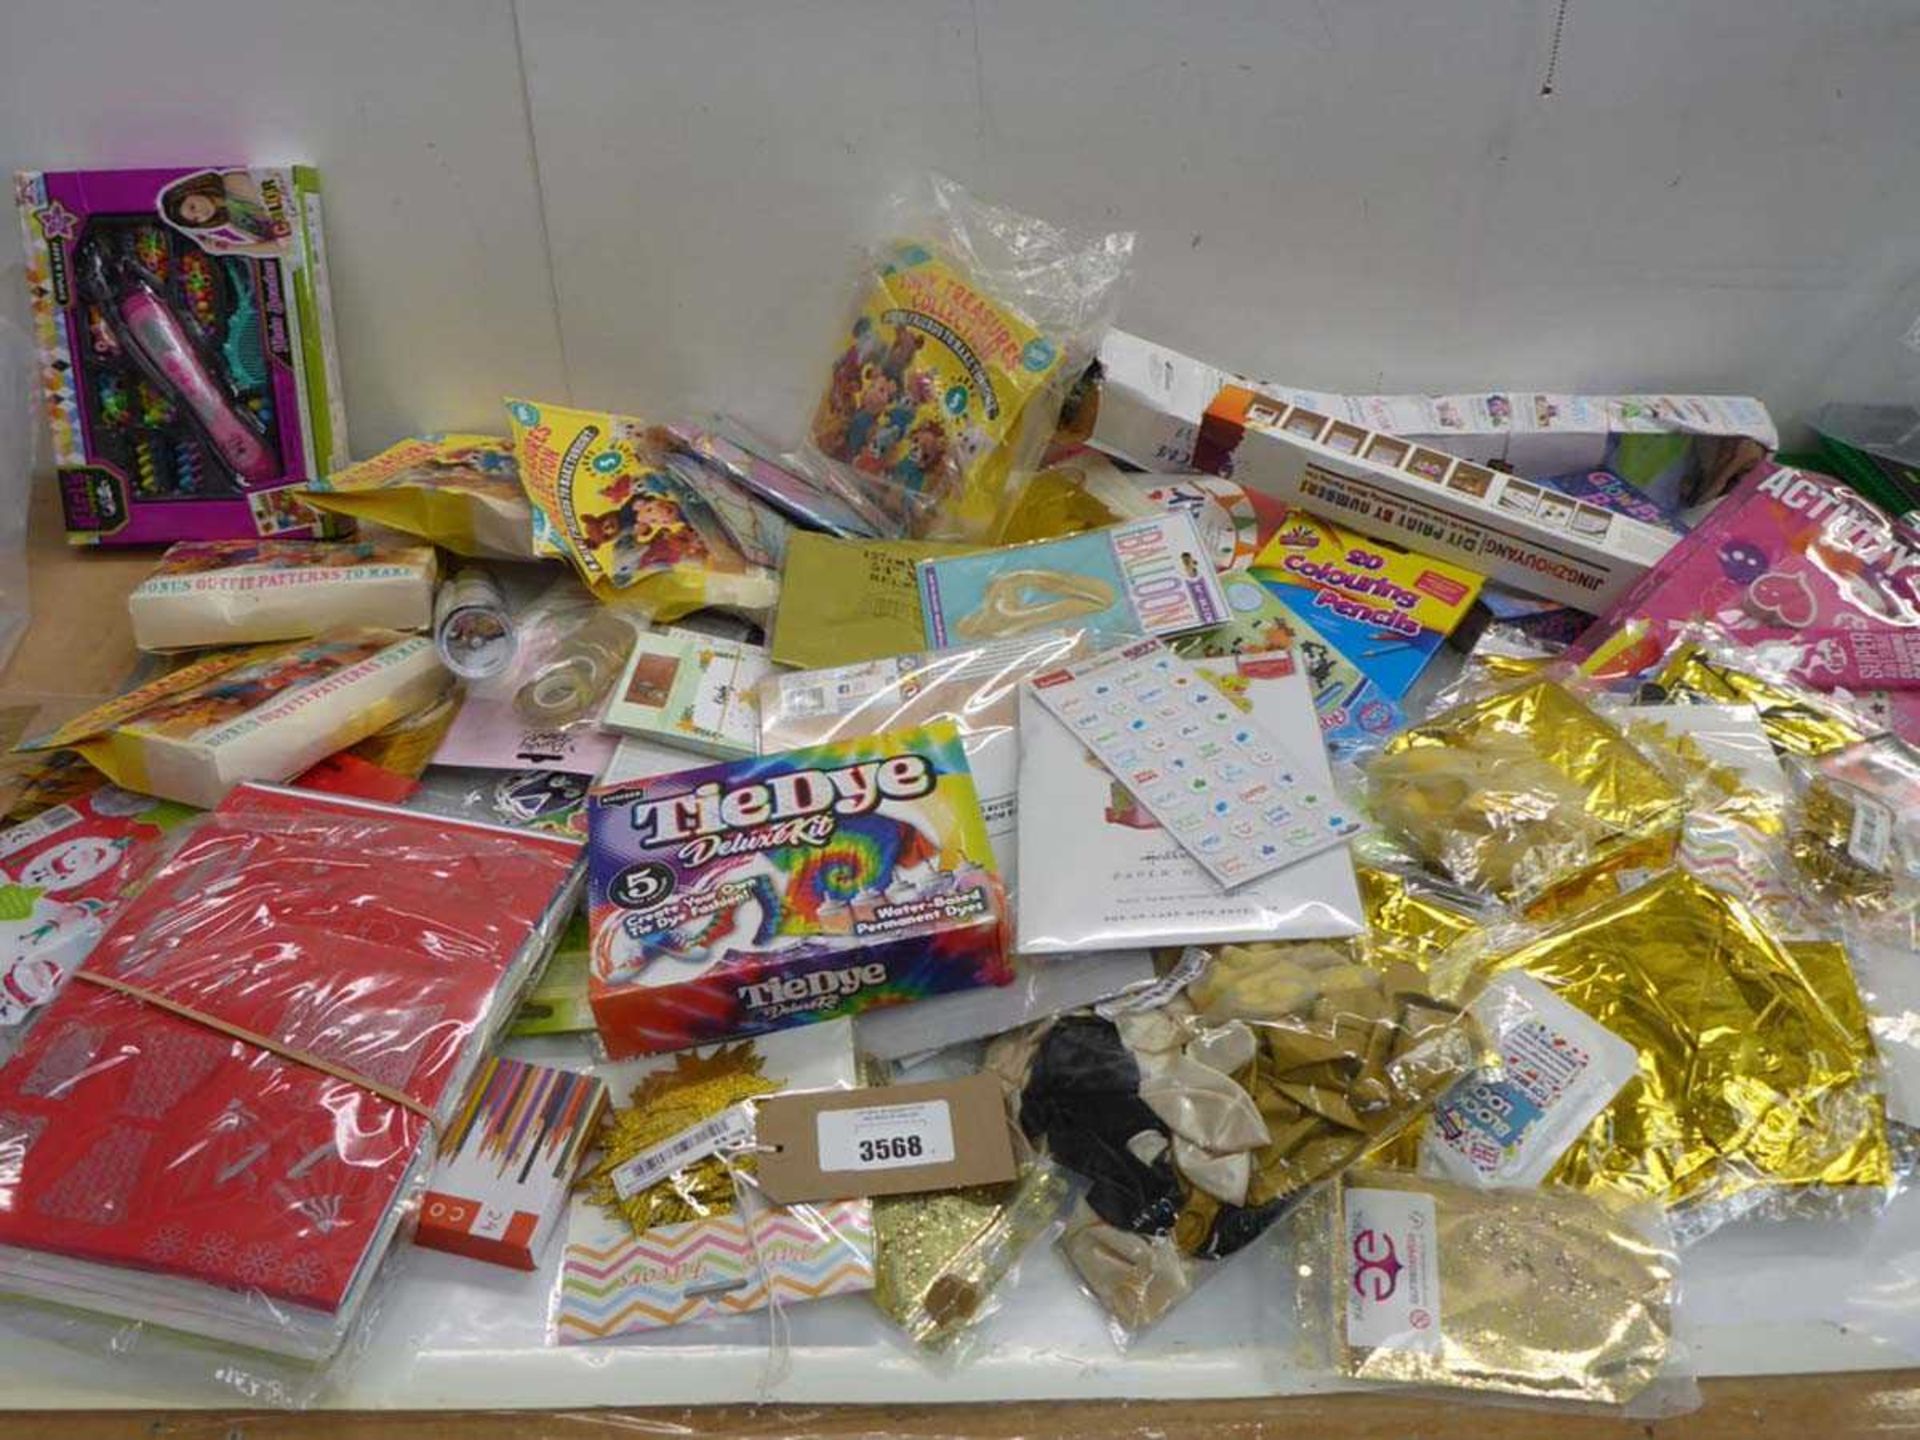 +VAT Large bag of art & craft packs, stationery, party accessories, glitter, paints etc